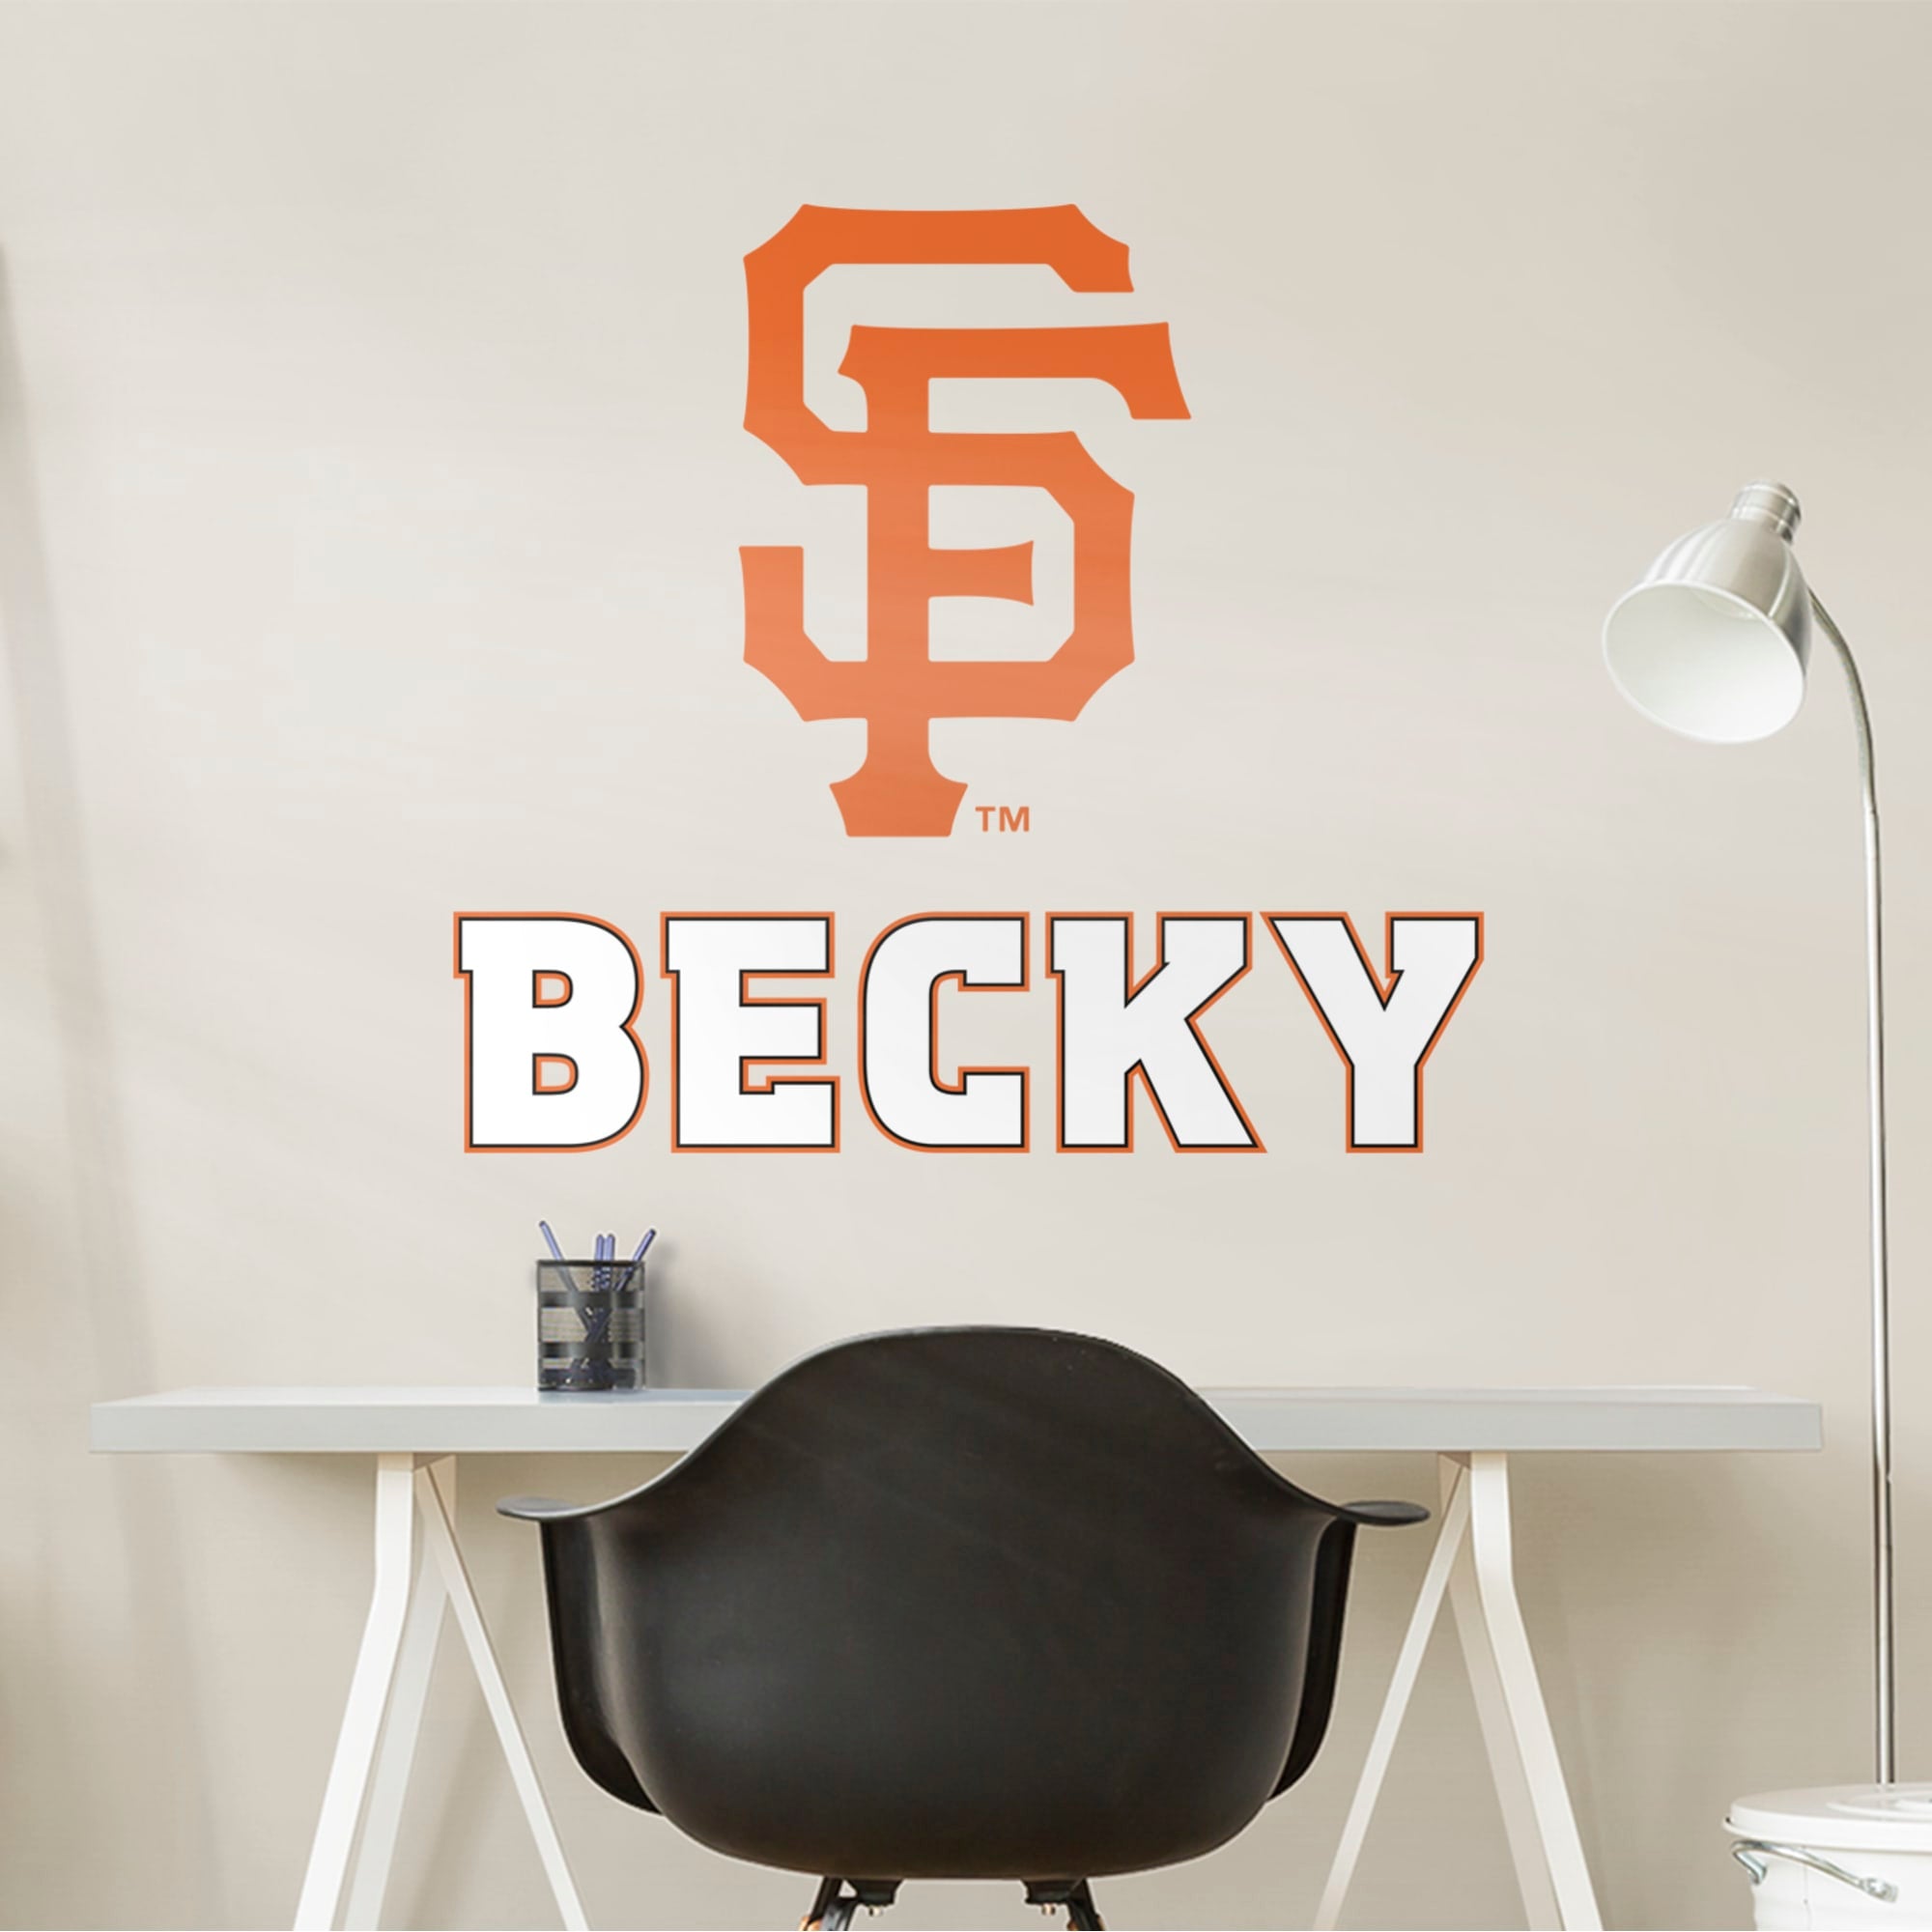 San Francisco Giants: "SF" Stacked Personalized Name - Officially Licensed MLB Transfer Decal in White (52"W x 39.5"H) by Fathea